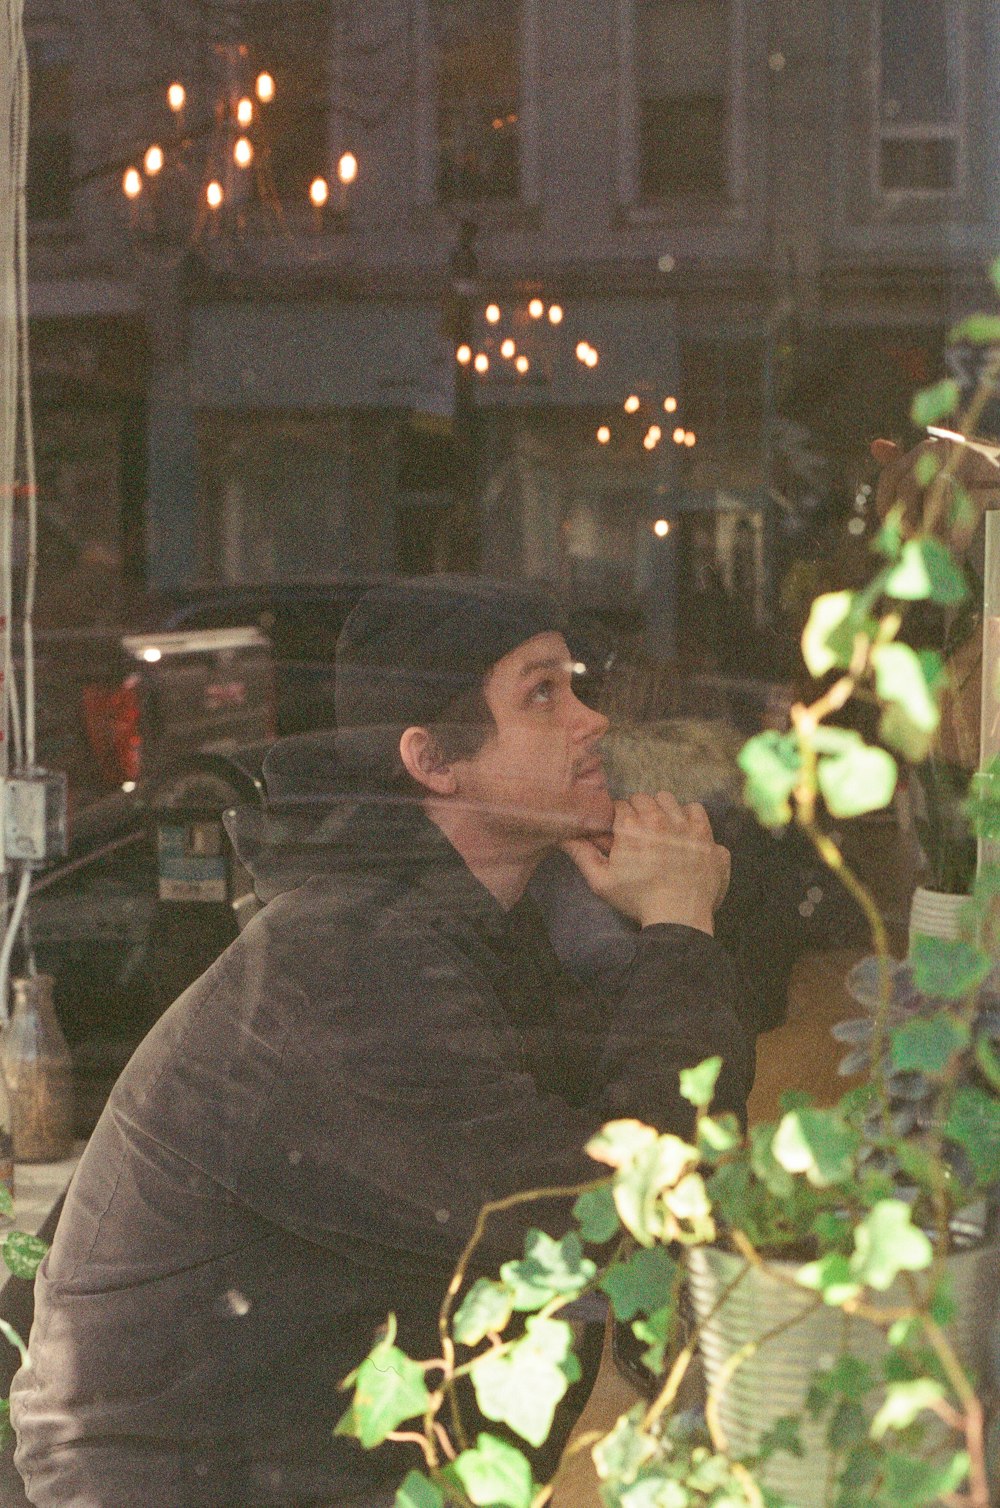 a man sitting in front of a window eating a donut